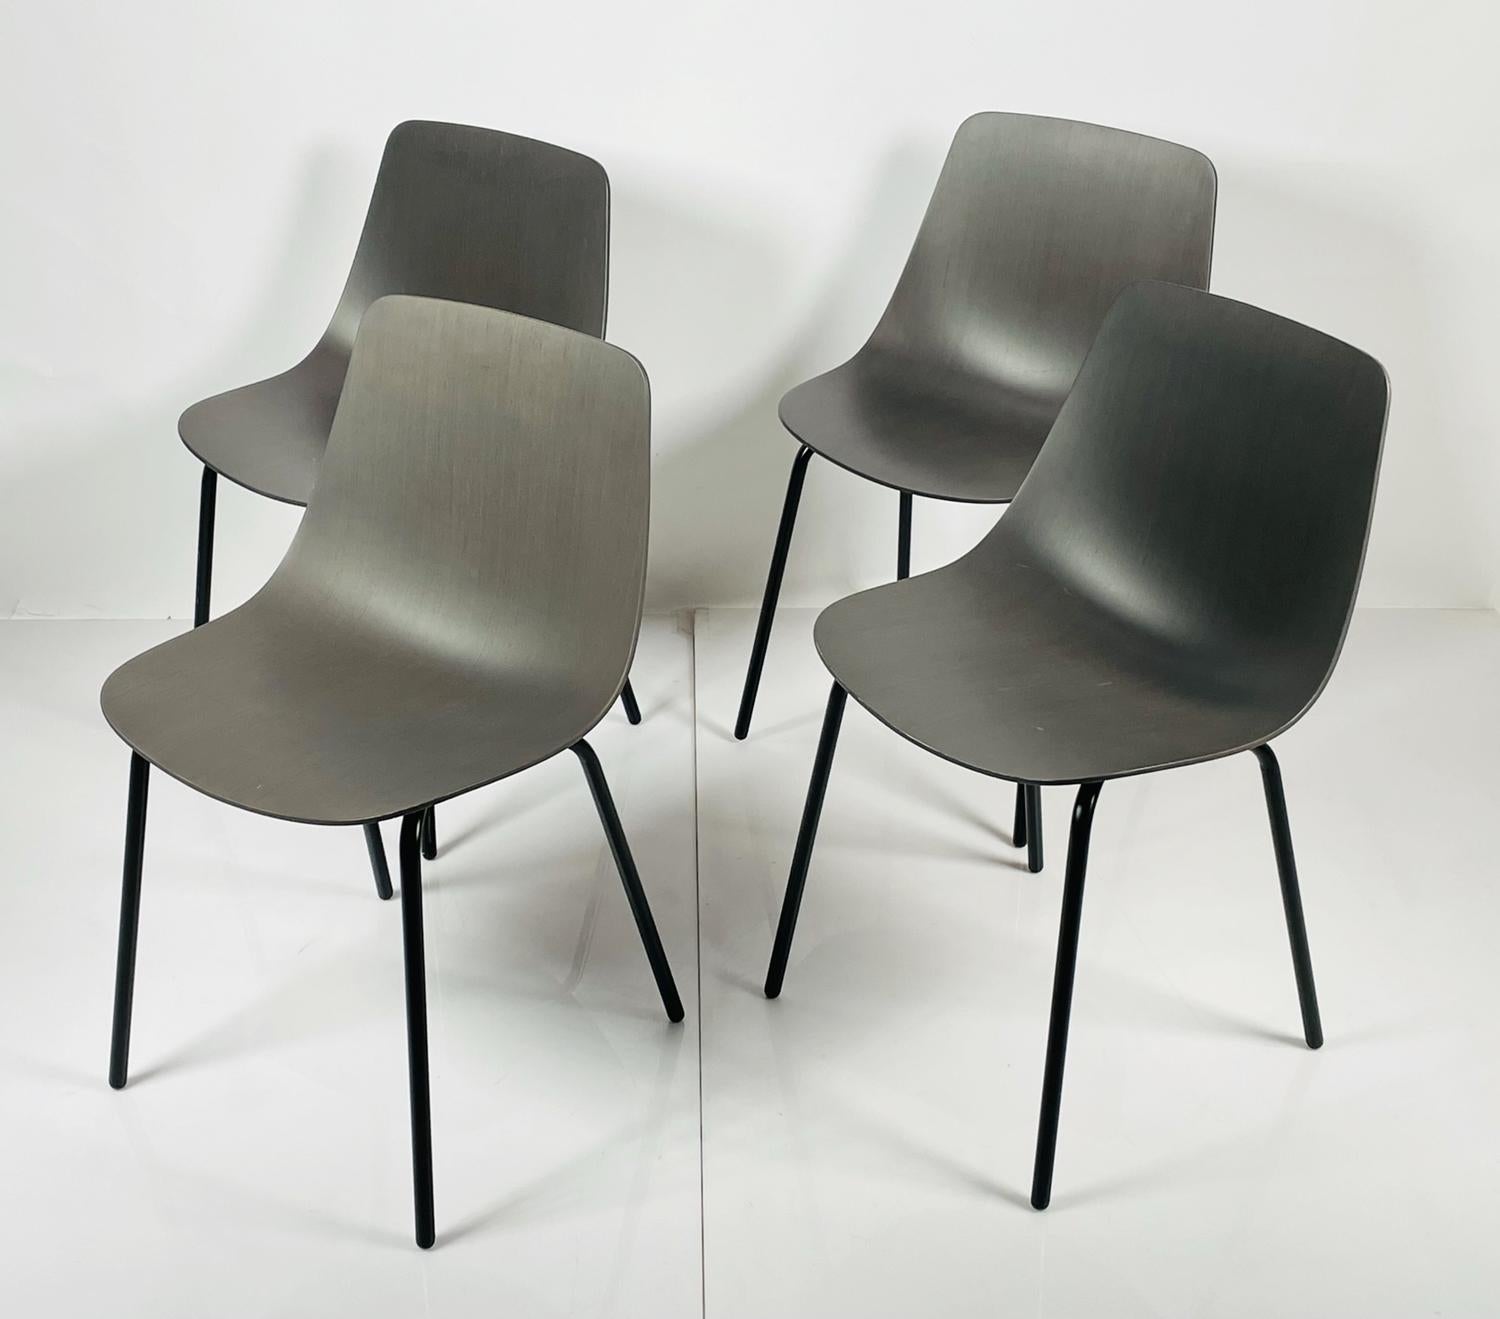 Set of four modern chairs having a molded plywood seat and metal legs with a black powder-coat finish.

Measurements:
31 inches high x 18 3/8 inches wide x 18 3/4 inches deep x 17.50 inches seat height.